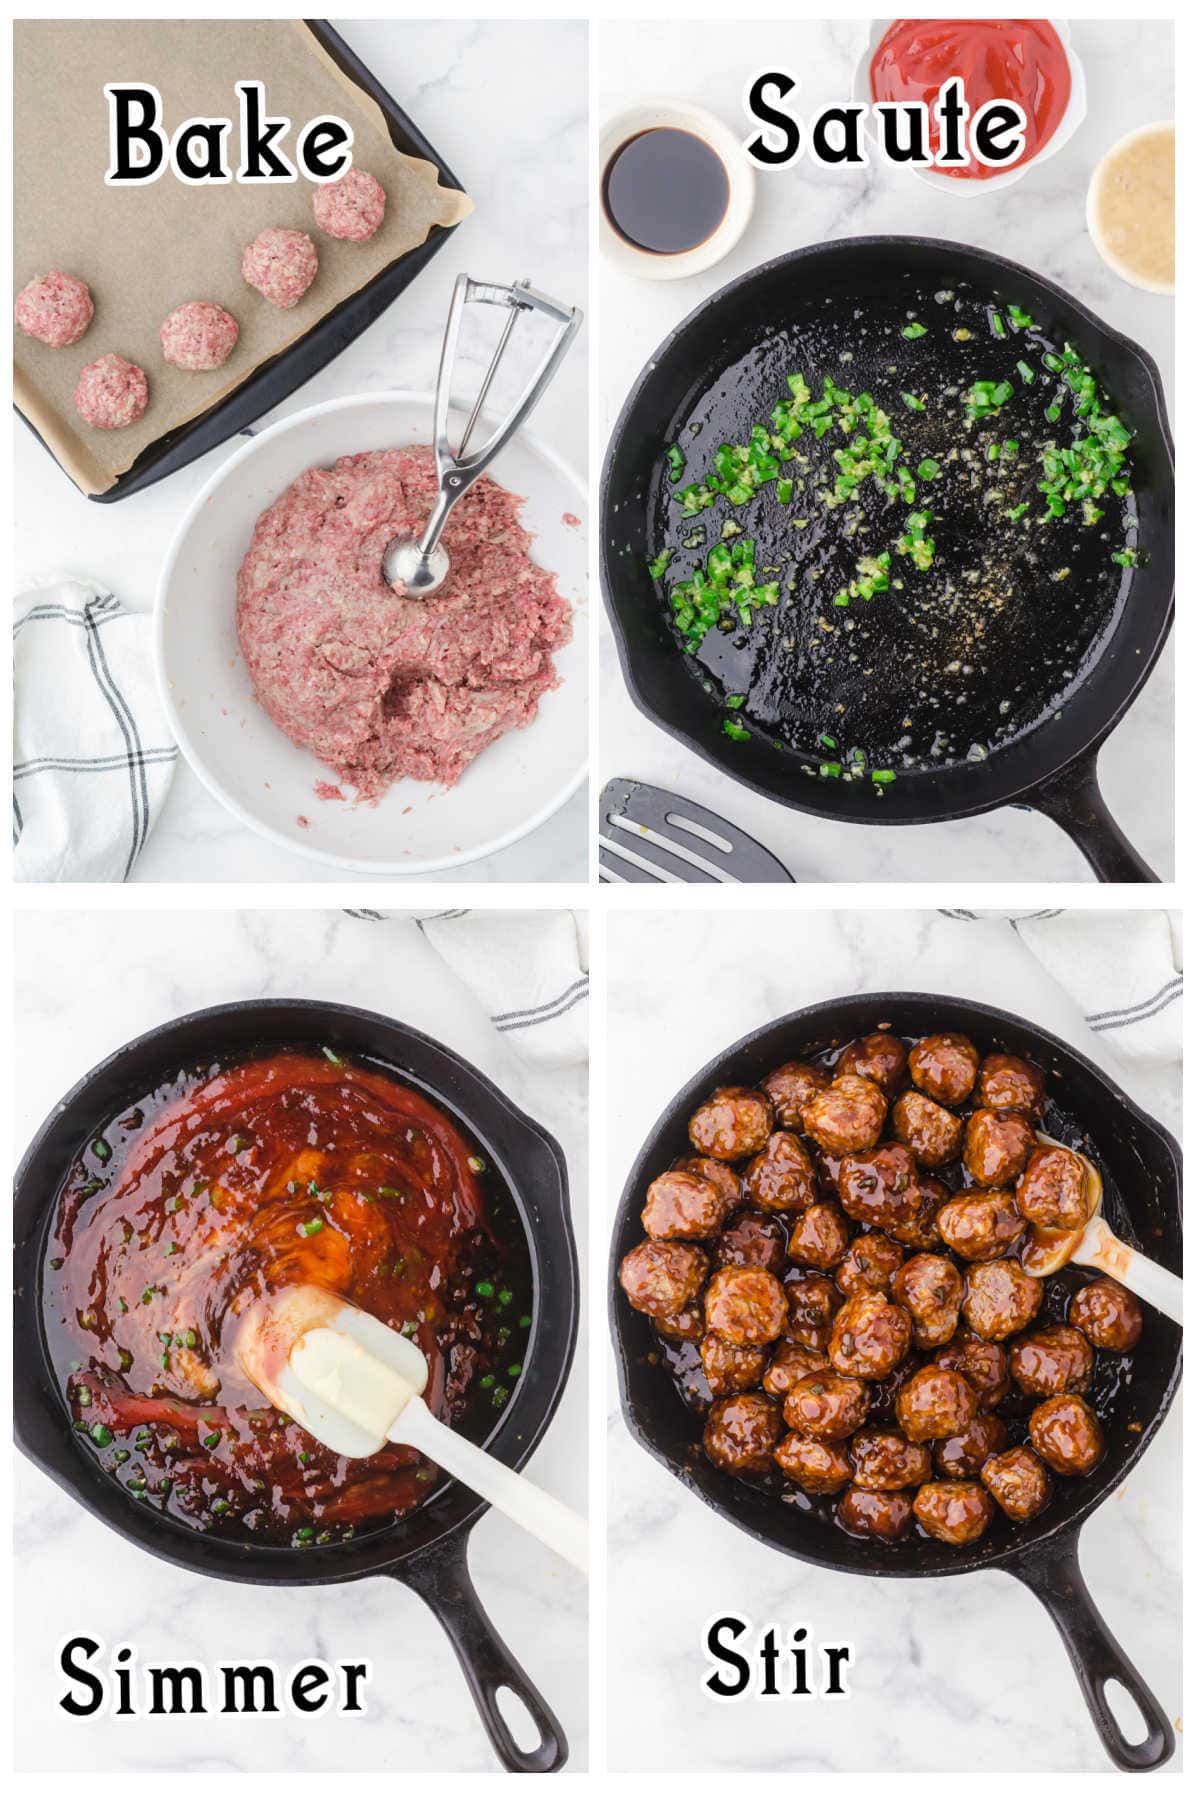 Step by step images showing the process of making the meatballs.